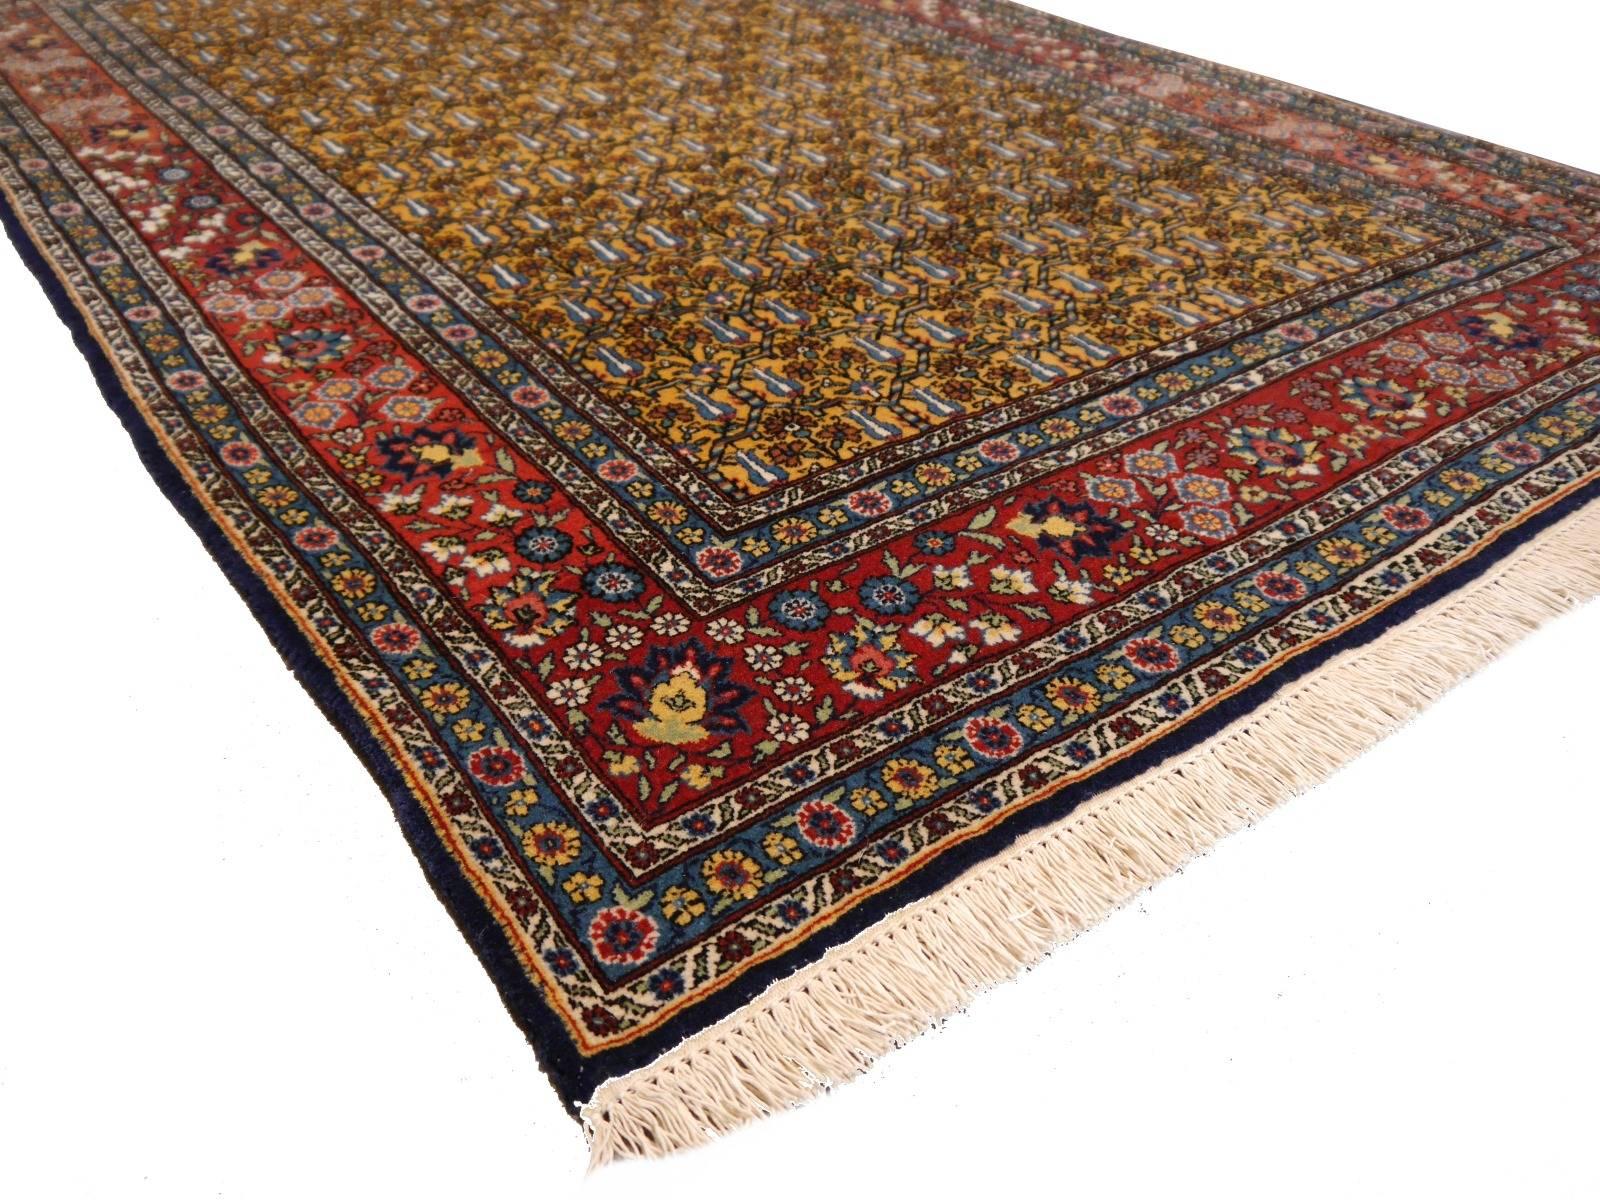 Very beautiful and unusual Turkish Hereke rug, hand-knotted using best lamb’s wool. Unique color combination with mustard colored inner filed decorated with trees of life and blue tulips. This rug is very fine and densely knotted using the Turkish